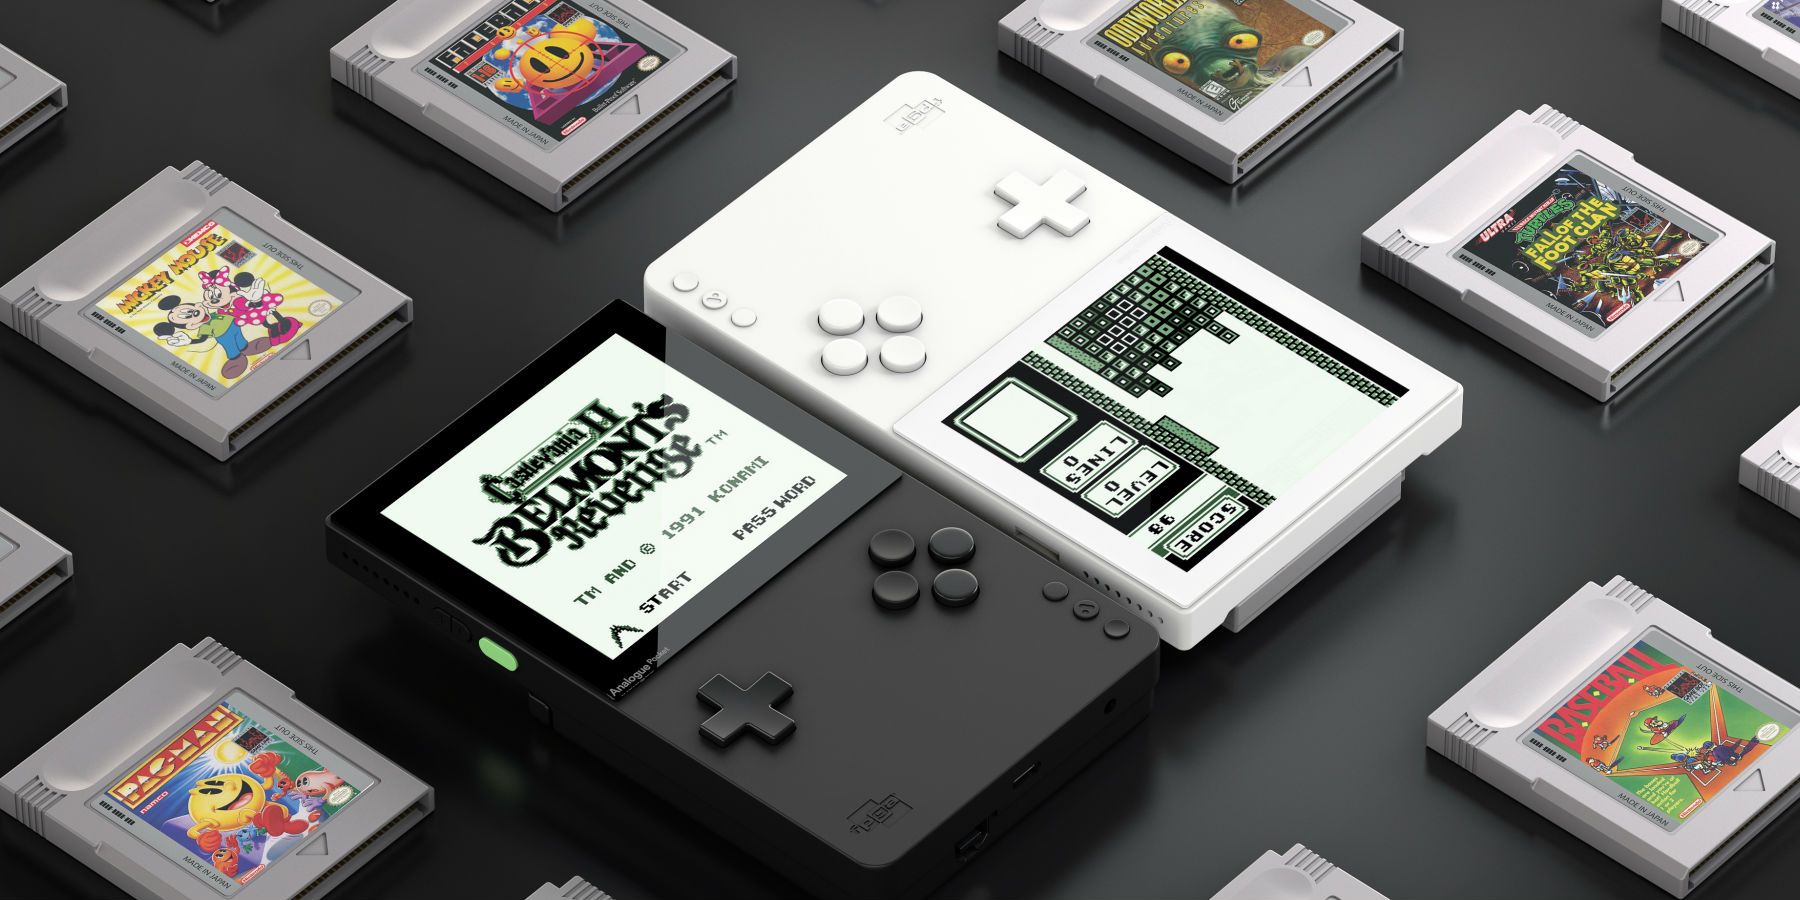 New Handheld Plays All The Game Boy Classics